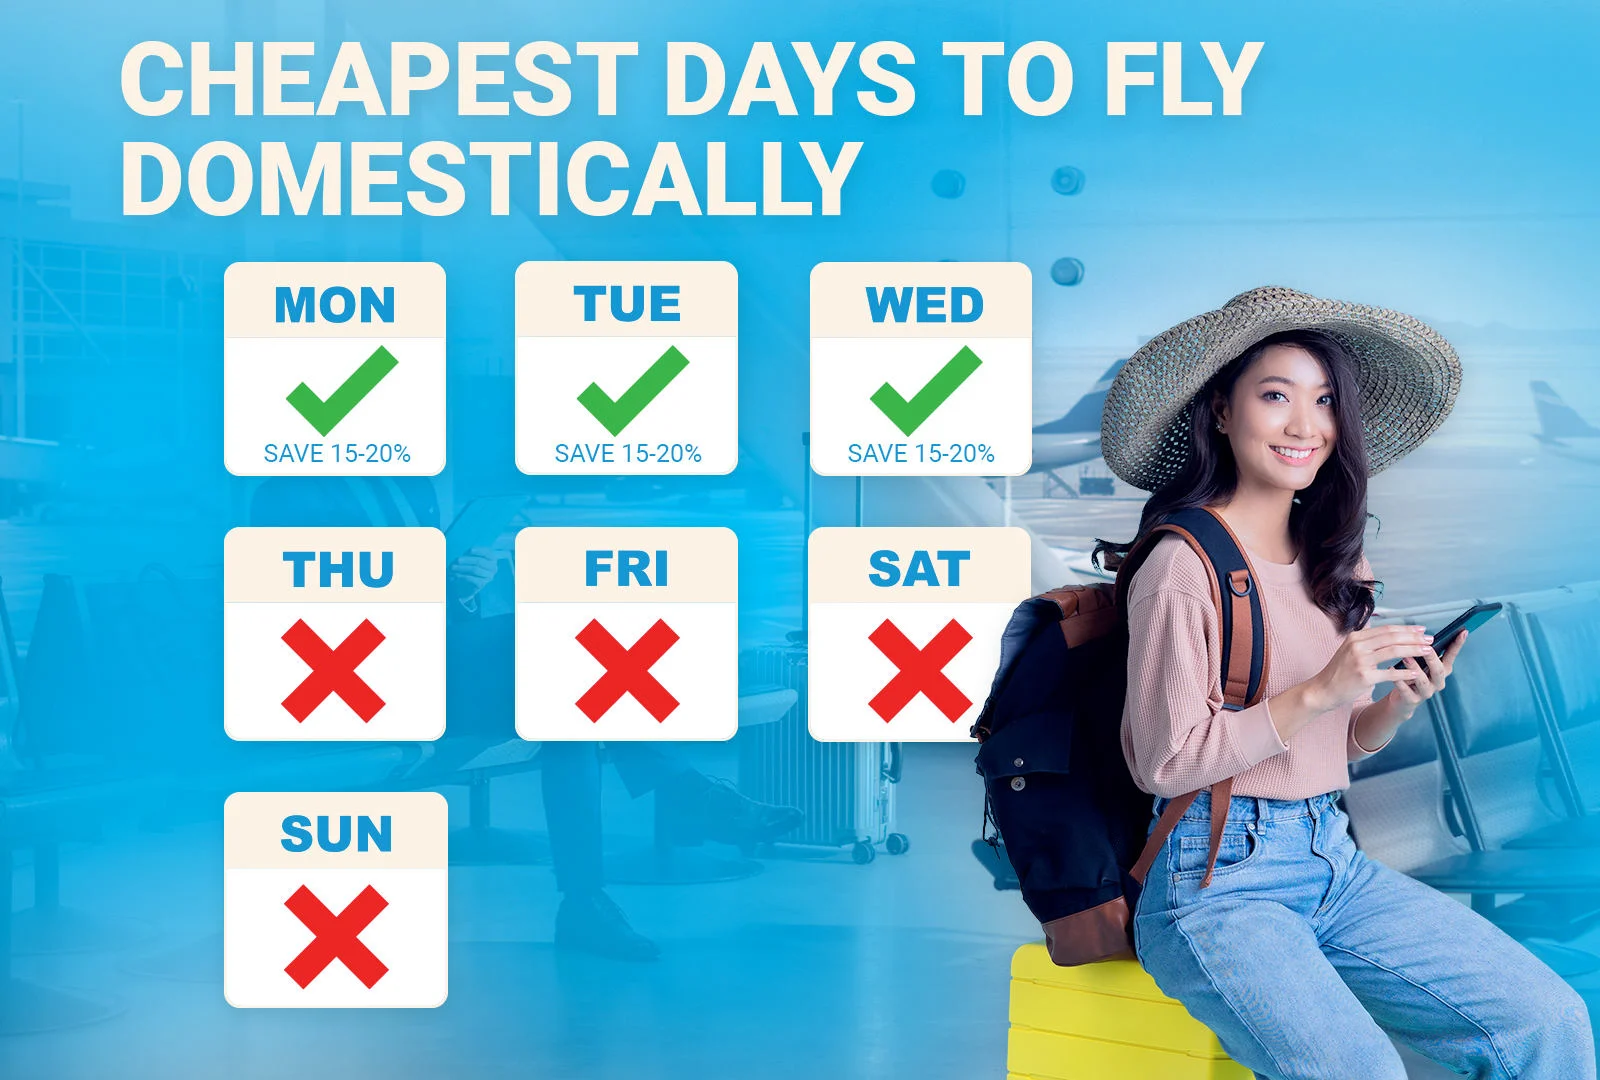 Image of a woman with a hat and a backpack next to a summary of the cheapest days to fly domestically in the US